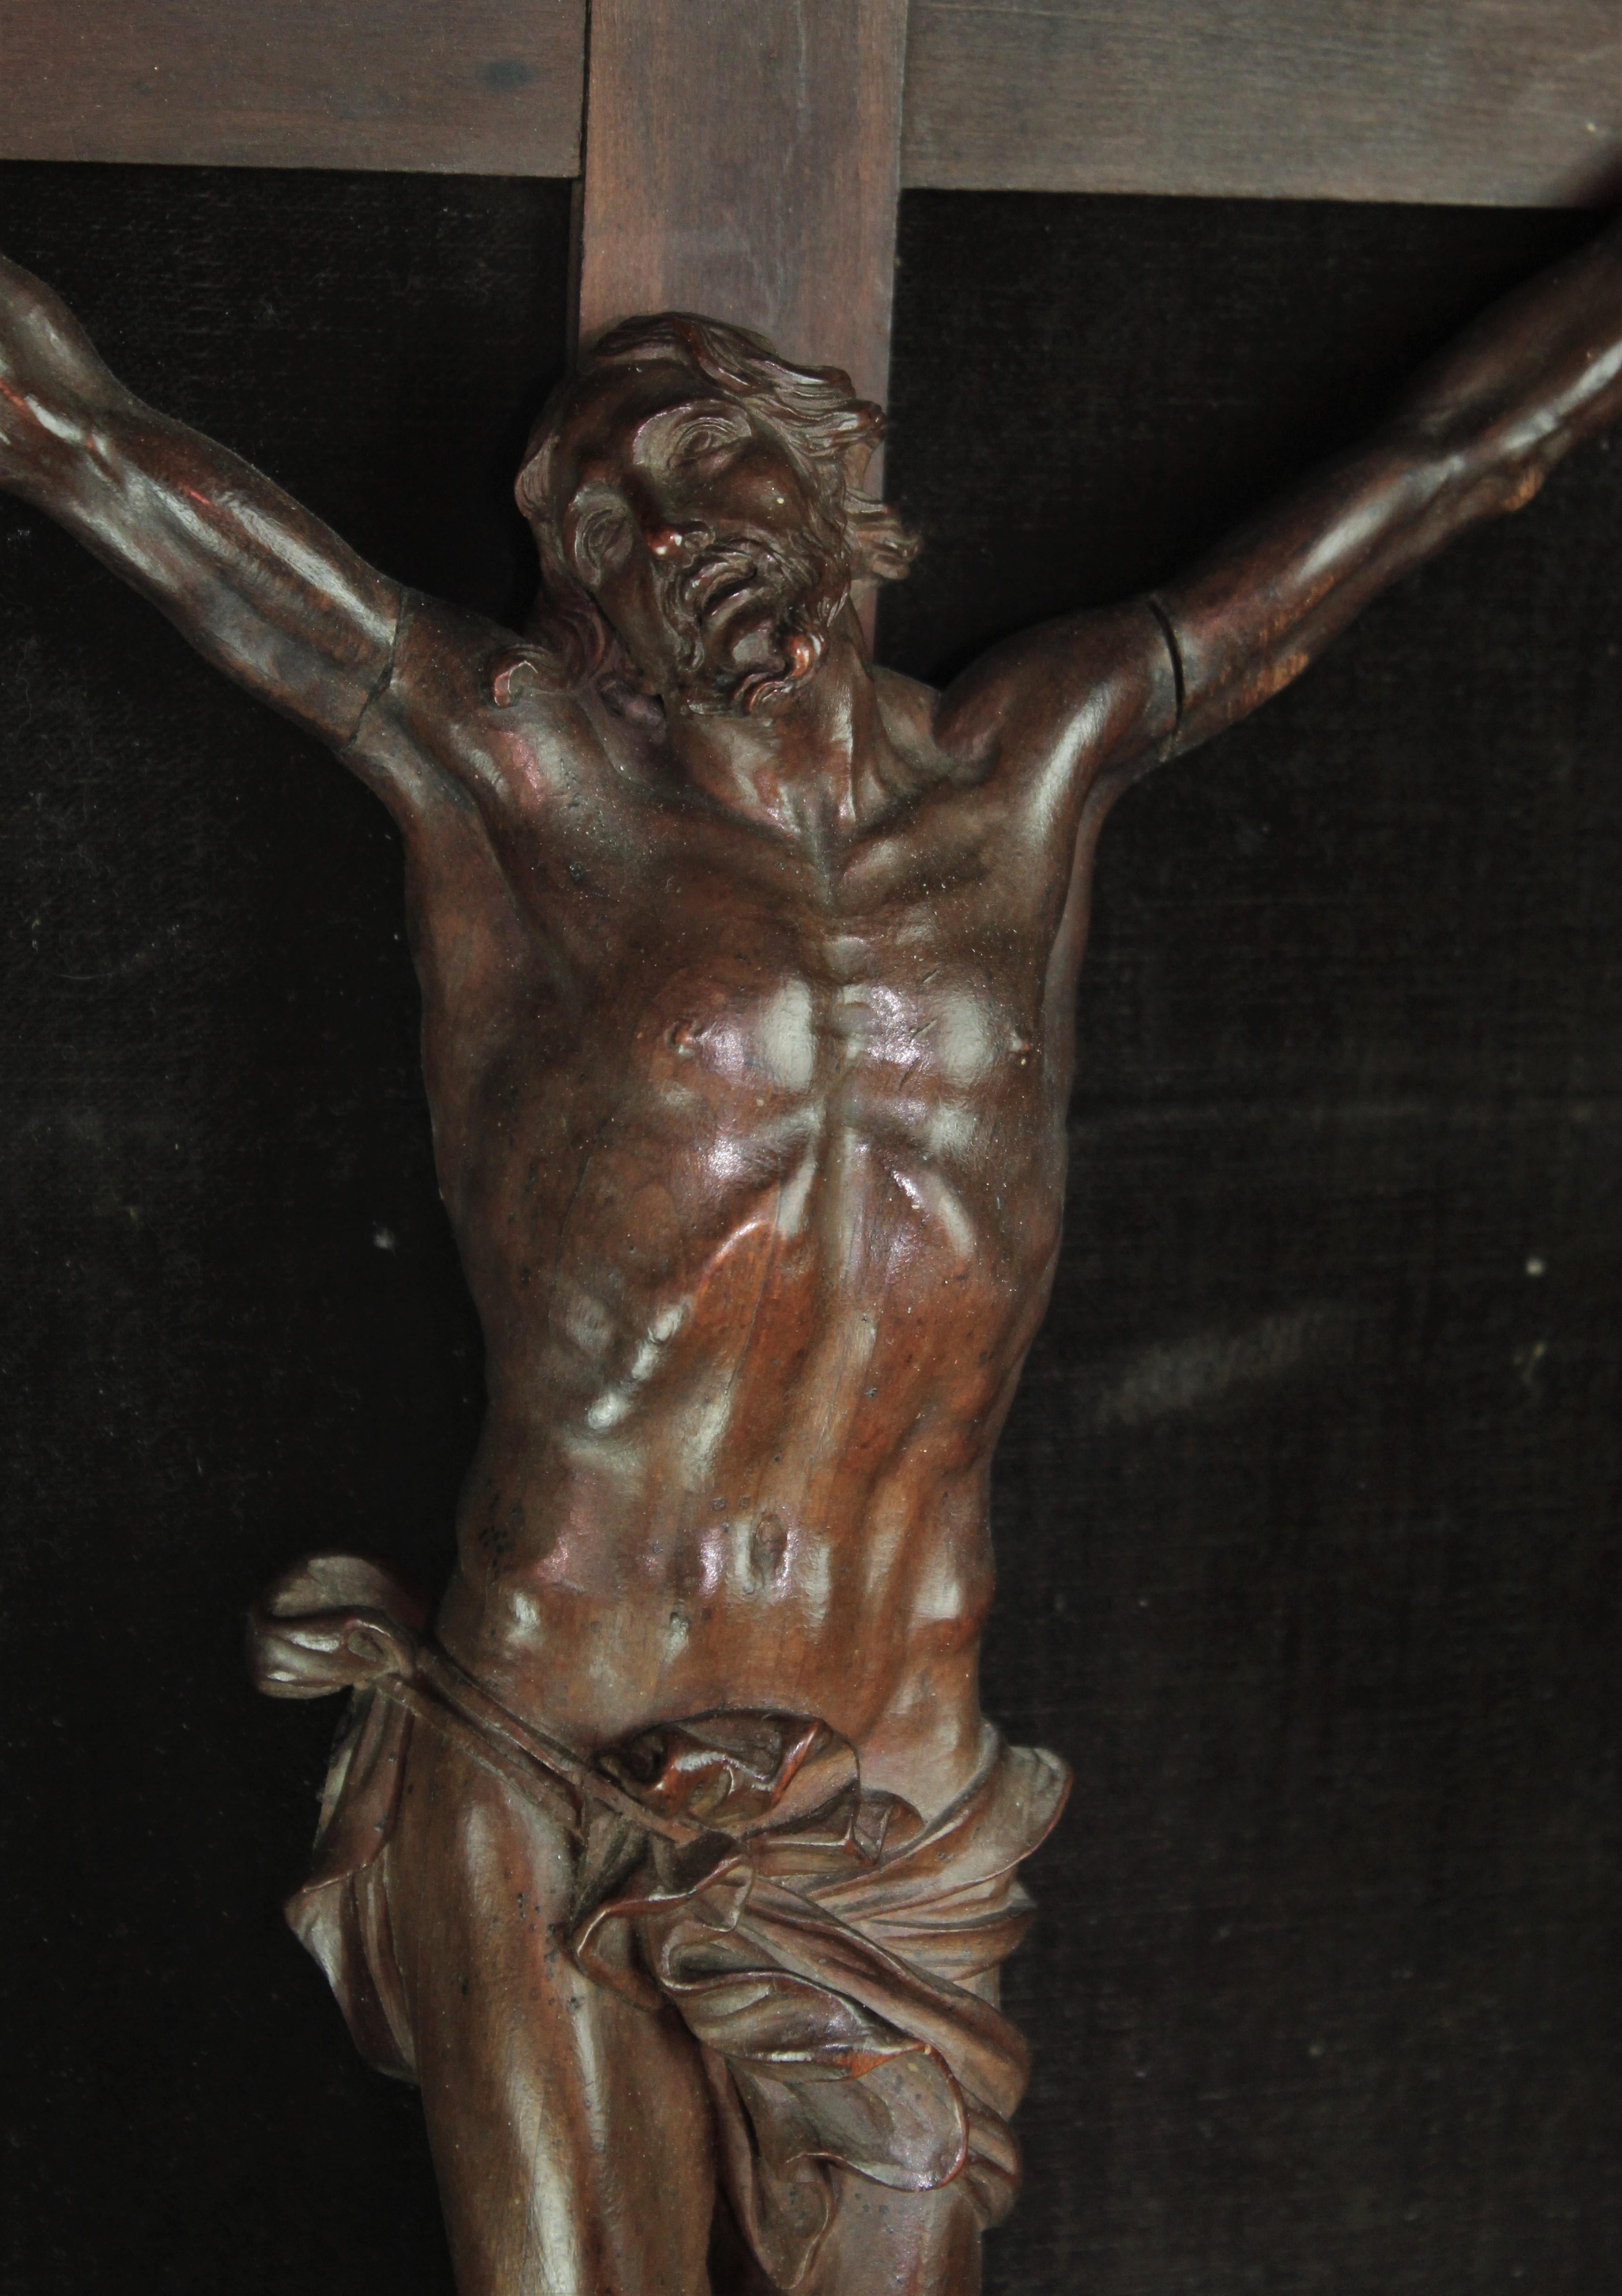 Superb French Regency Period Christ from the Nancy School - Sculpture by Unknown